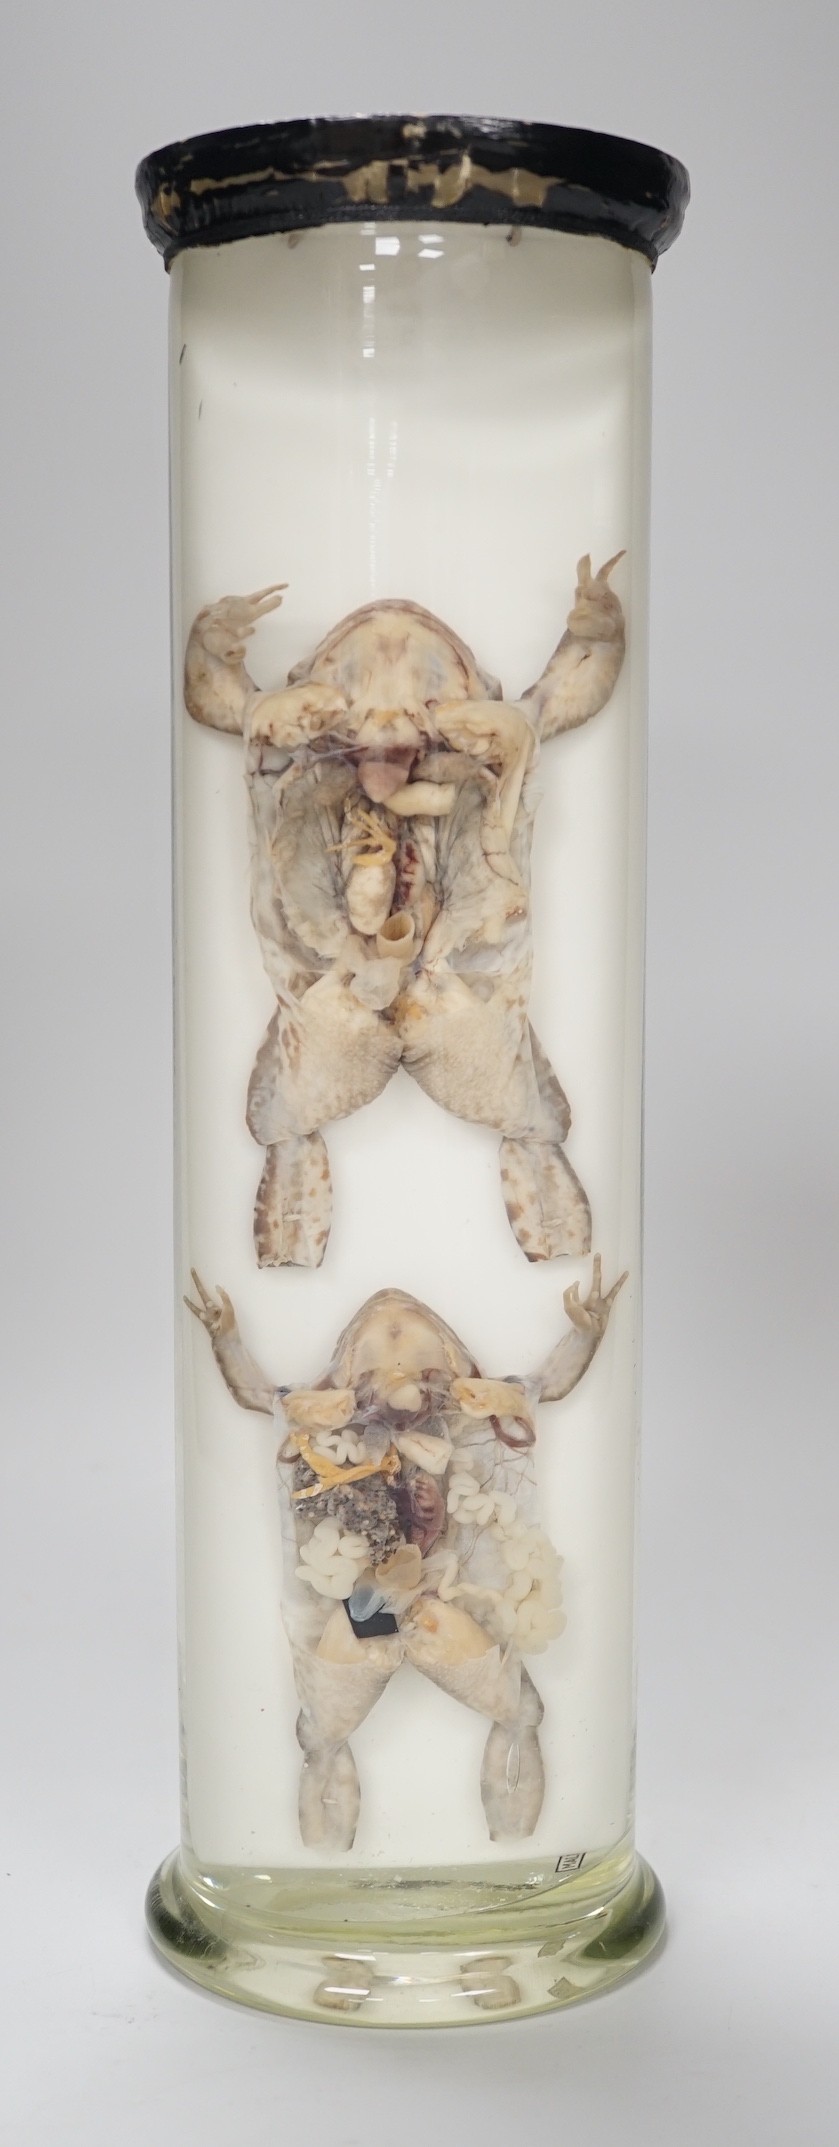 A biological specimen - Rana Temporaria (Common frog) reproductive systems, male and female forms,